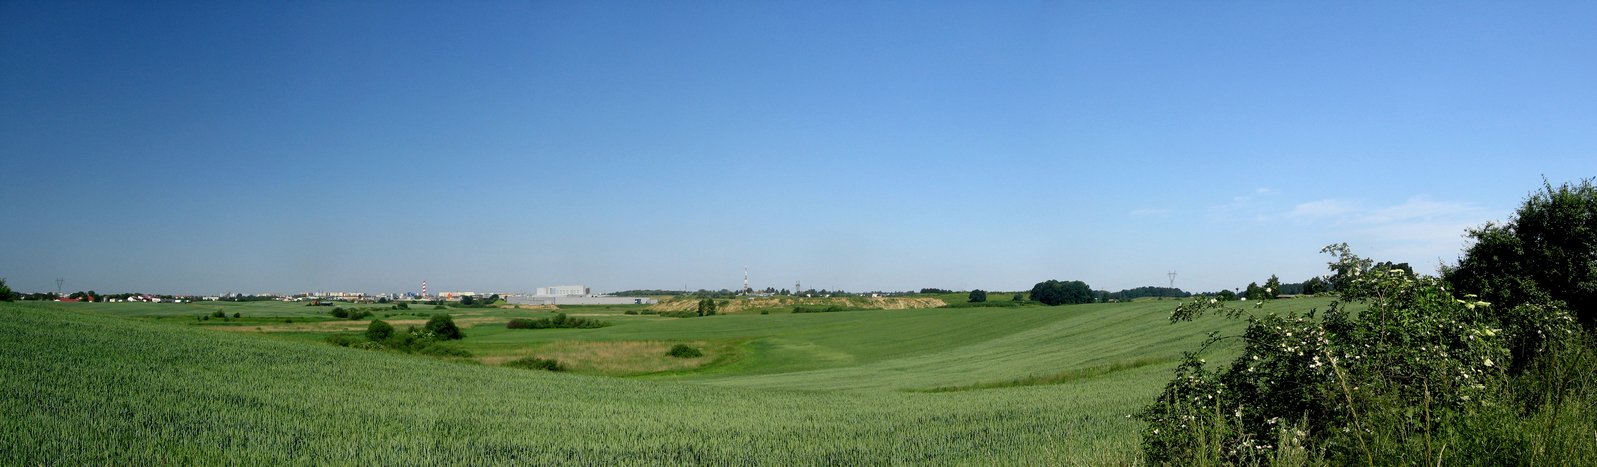 a large field of grass with trees on the far side